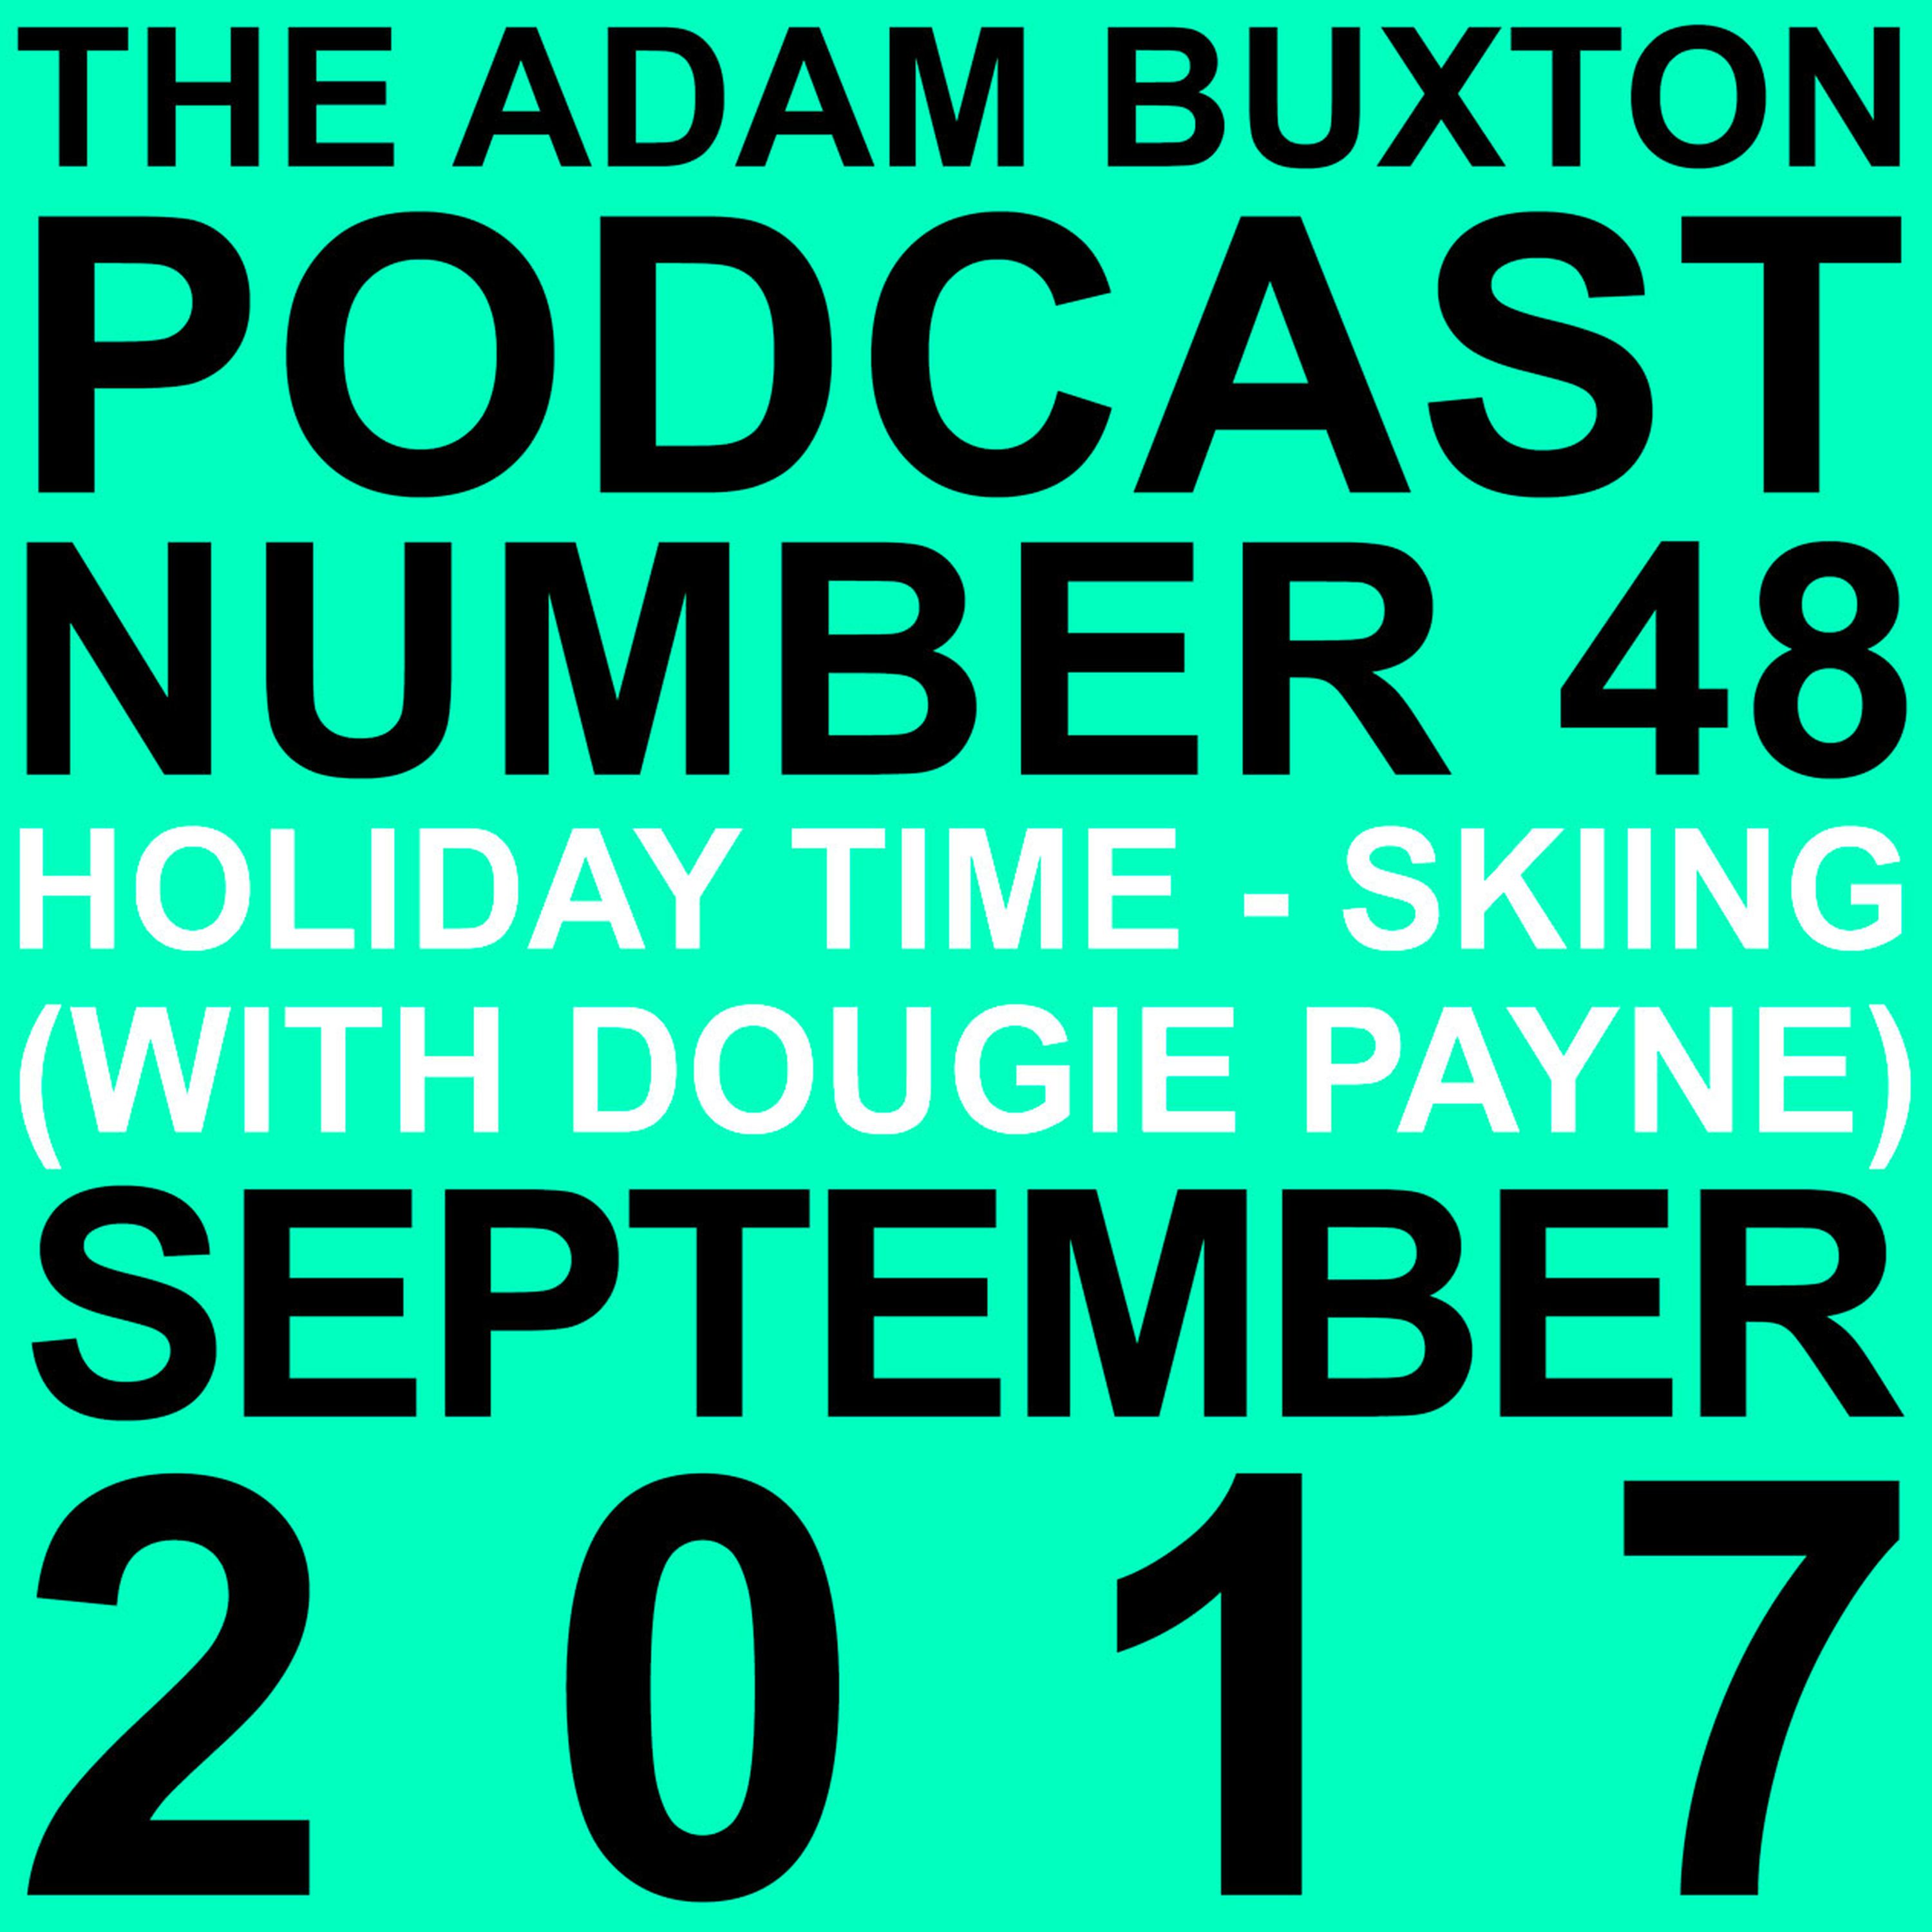 EP.48 - HOLIDAY TIME - SKIING (WITH DOUGIE PAYNE)